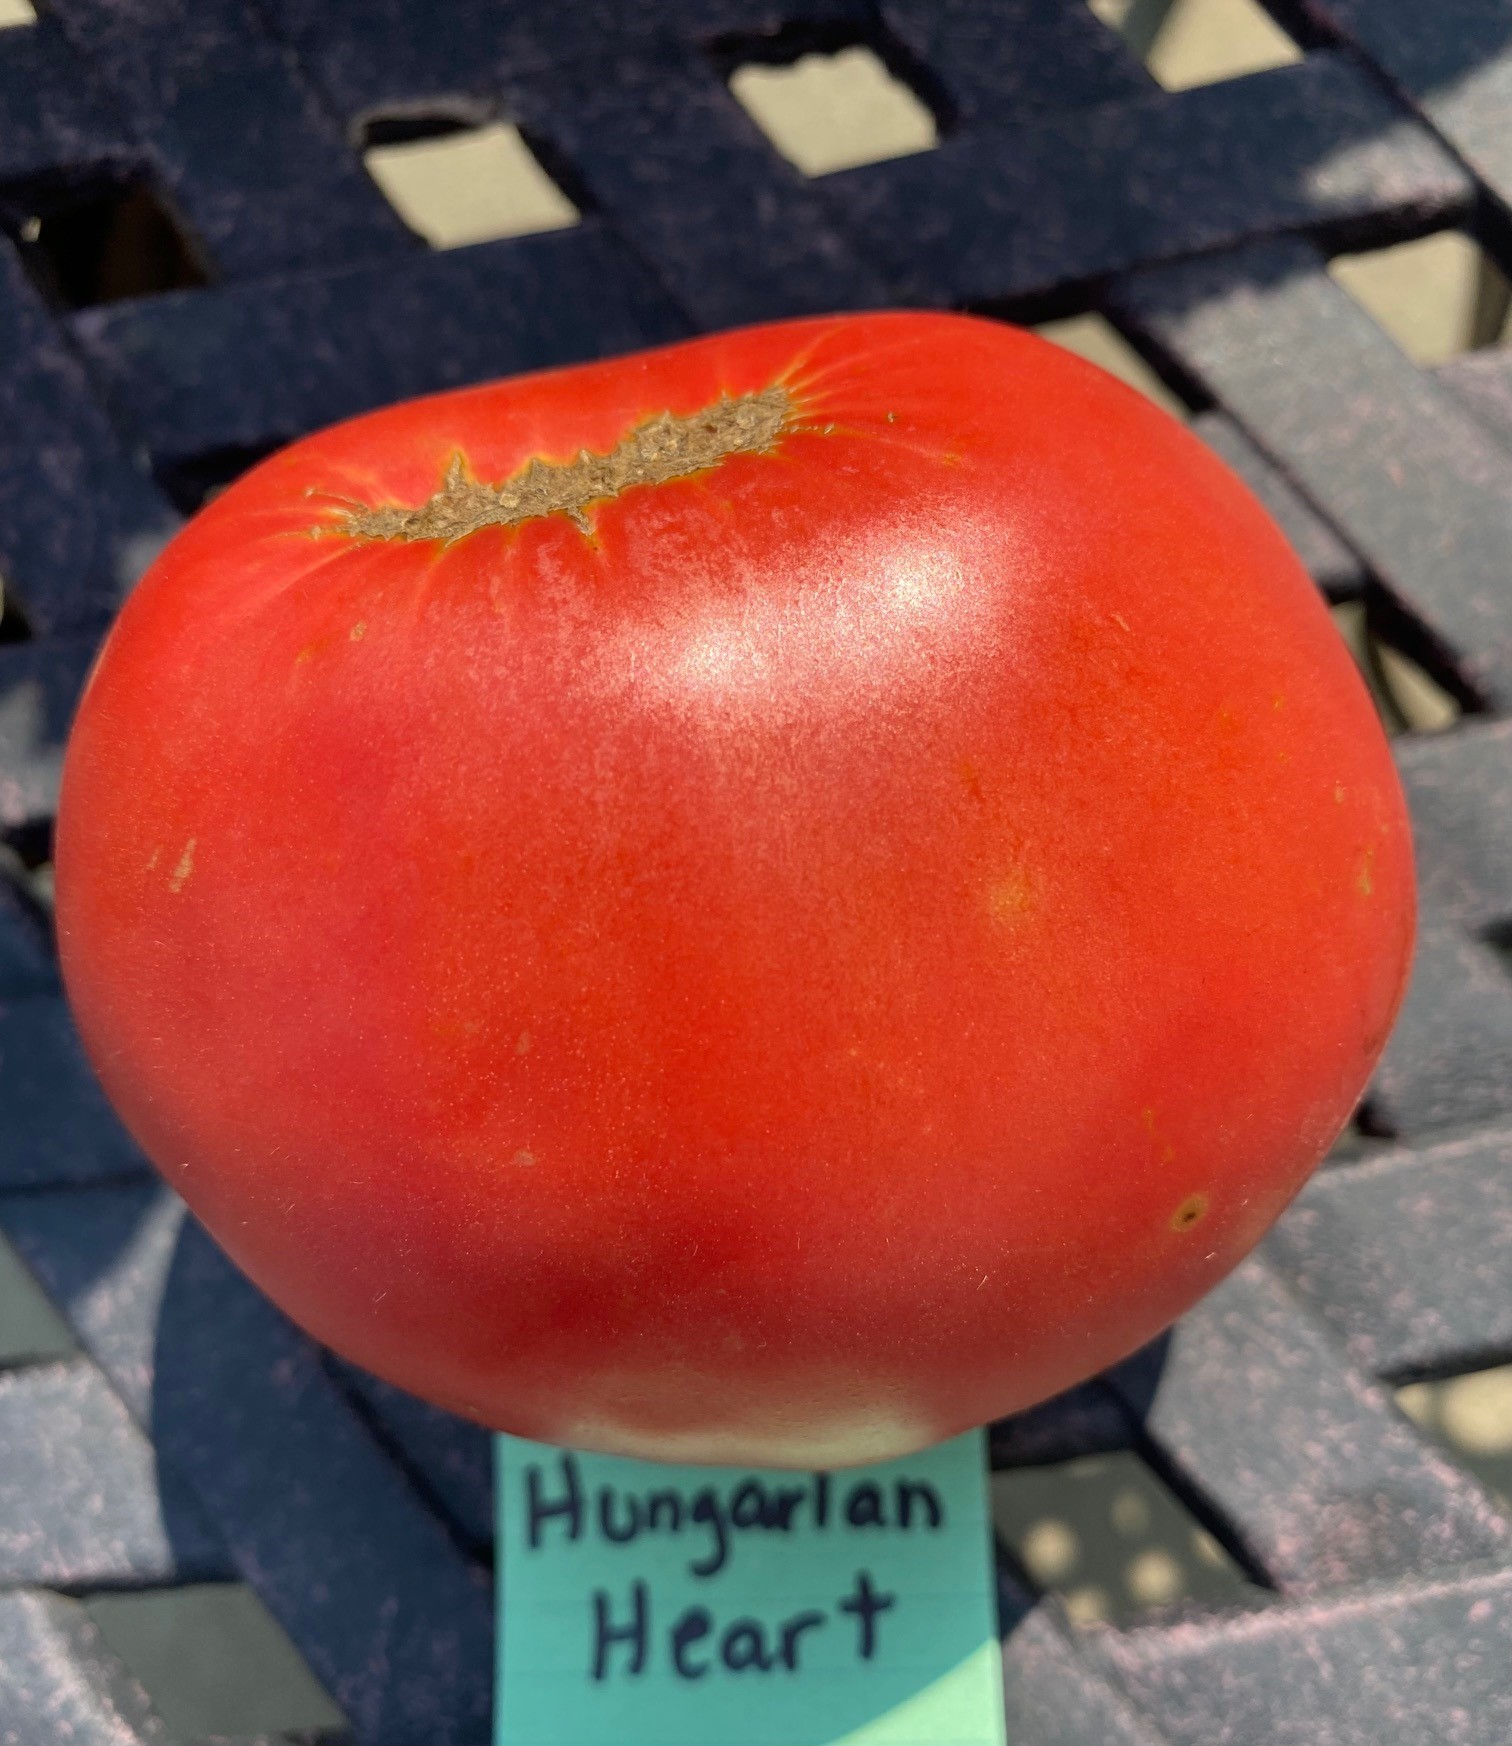 Hungarian heart tomato - photo credit C.Elisabeth at 8th Deadly Sin